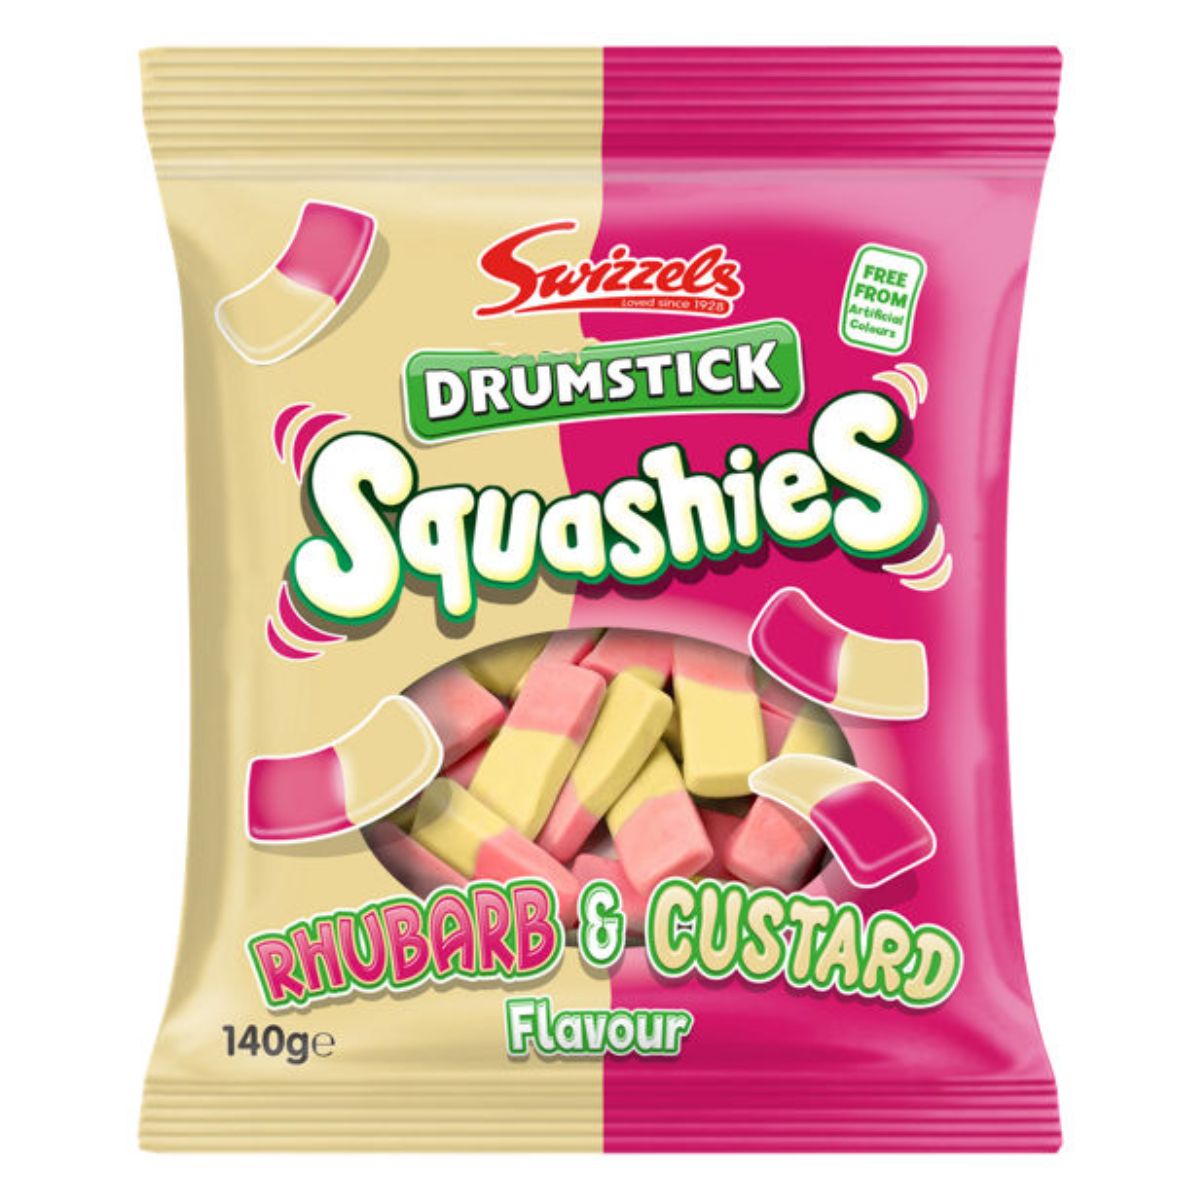 A bag of Swizzels - Drumstick Squashies Rhubarb & Custard Flavour - 140g candy, displaying pink and white chewy sweets.